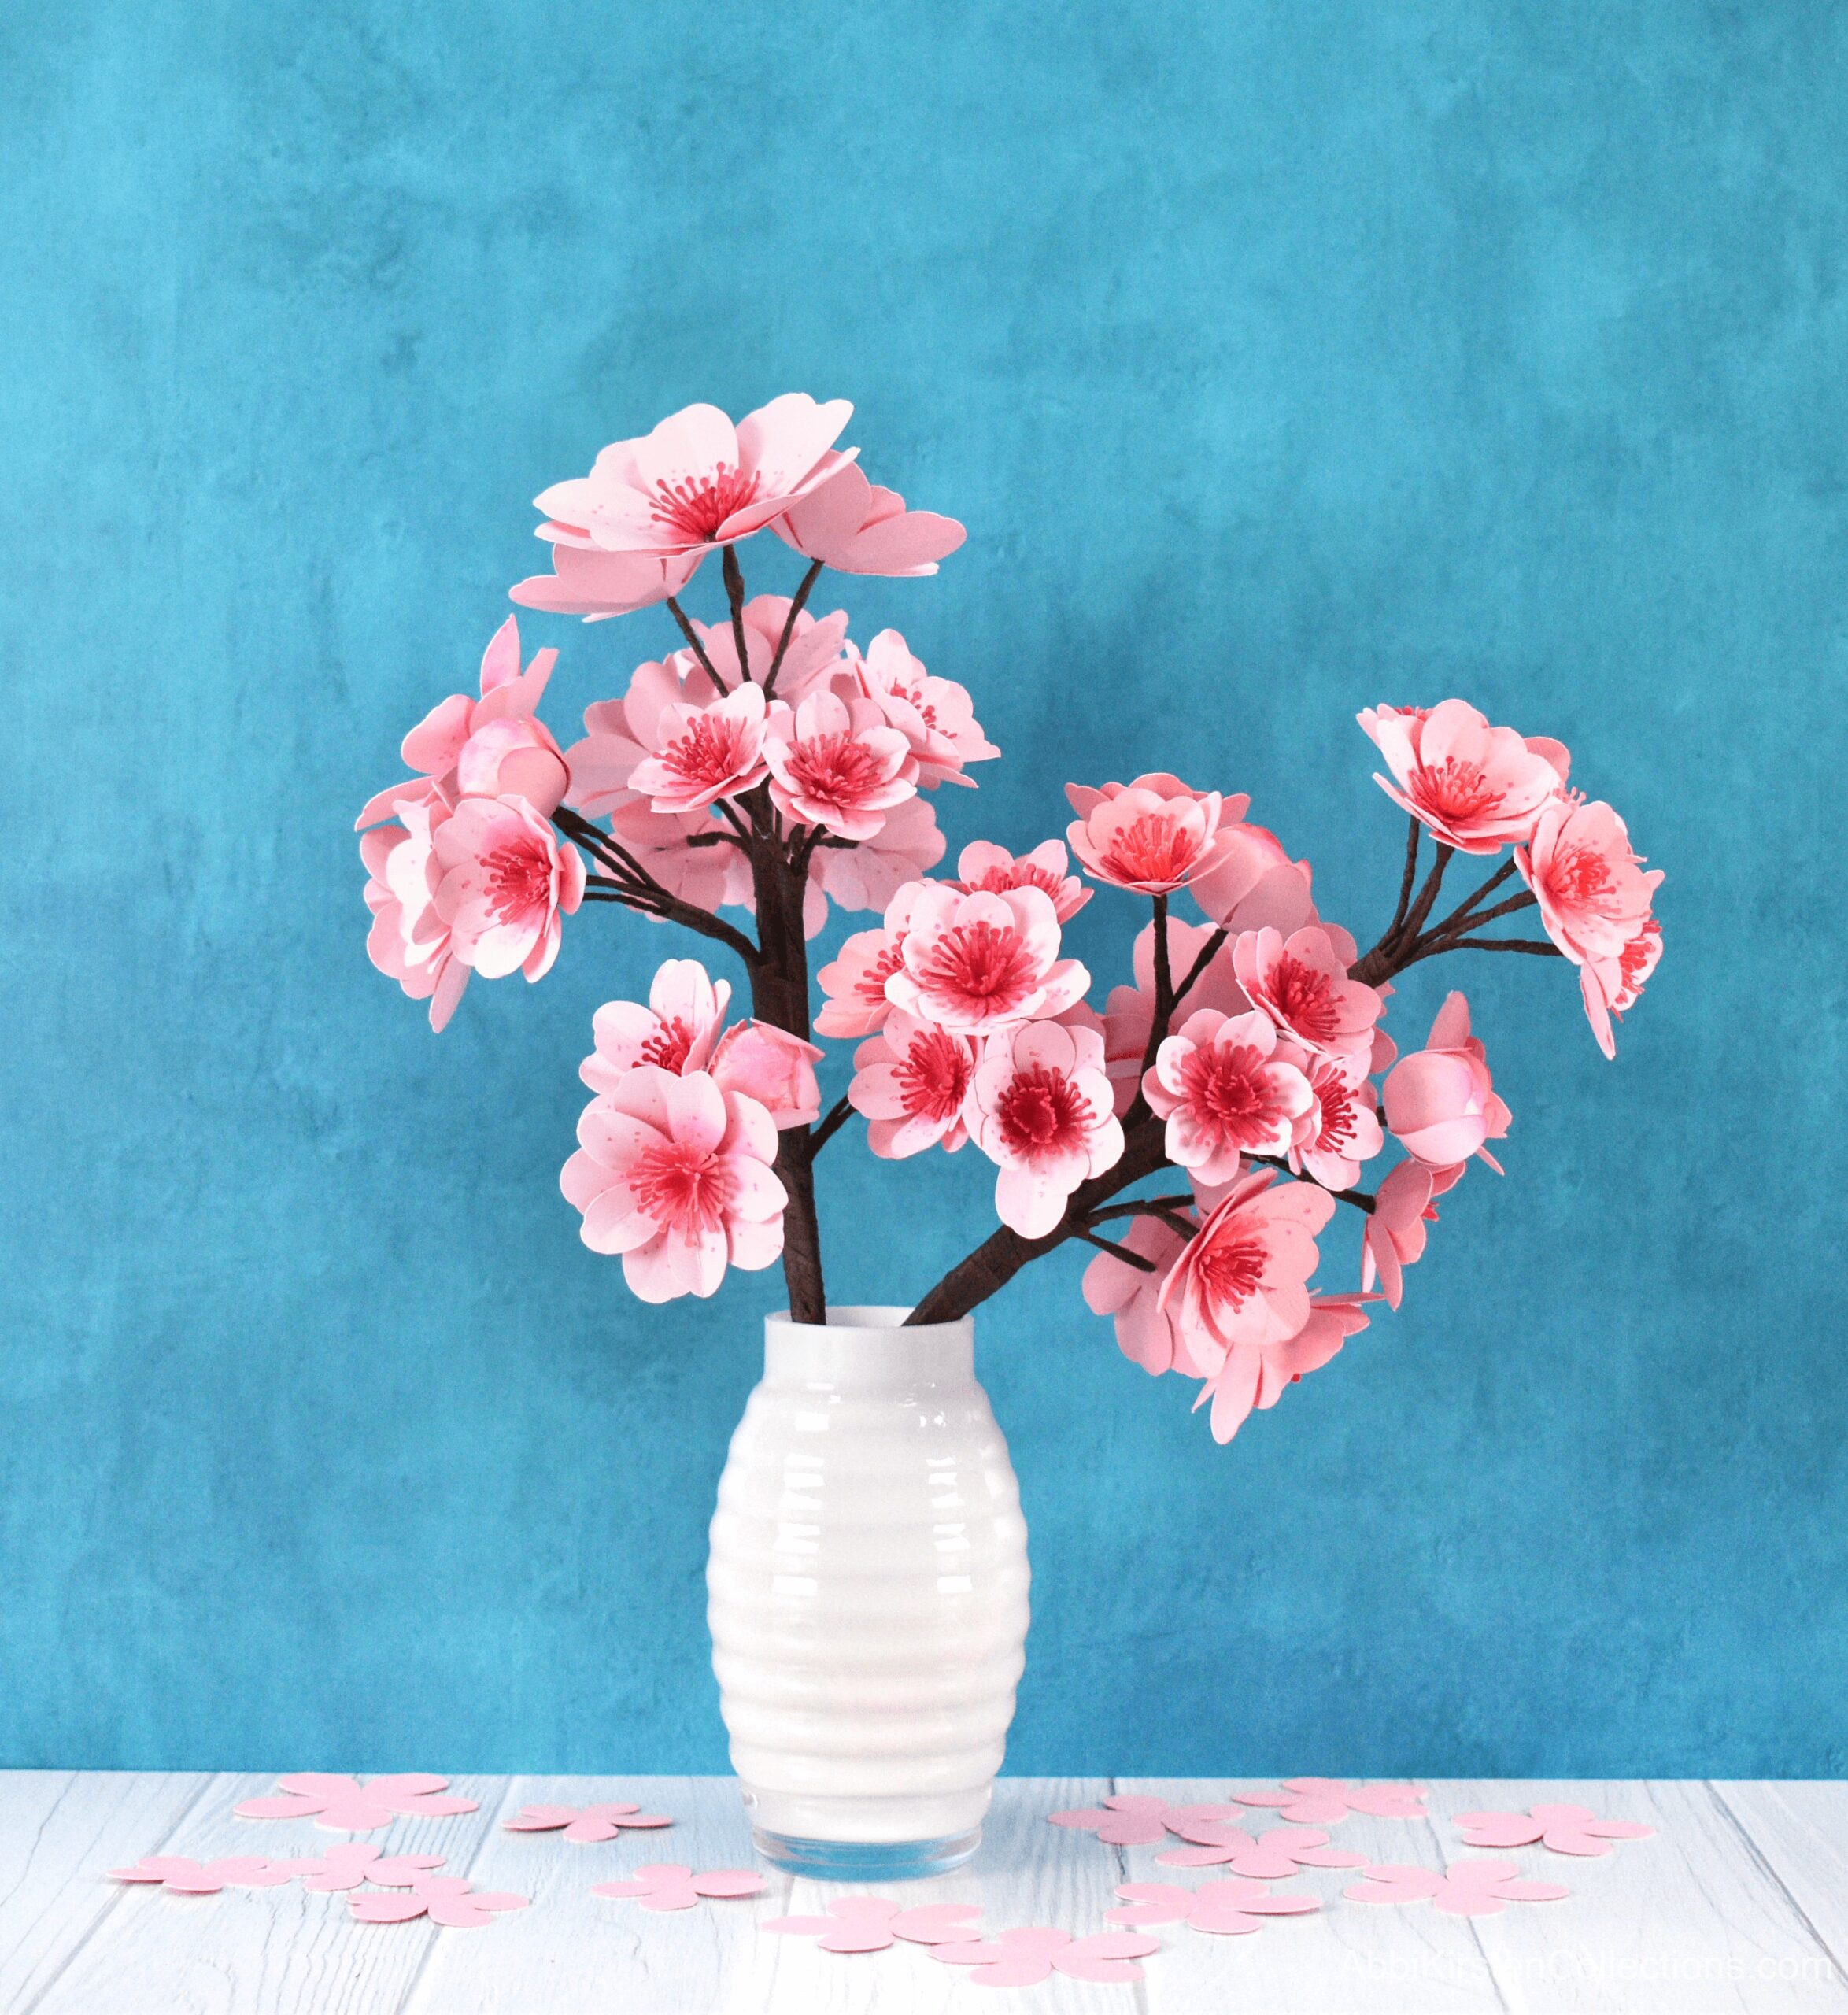 DIY Paper Flower Cherry Blossoms with Free Templates